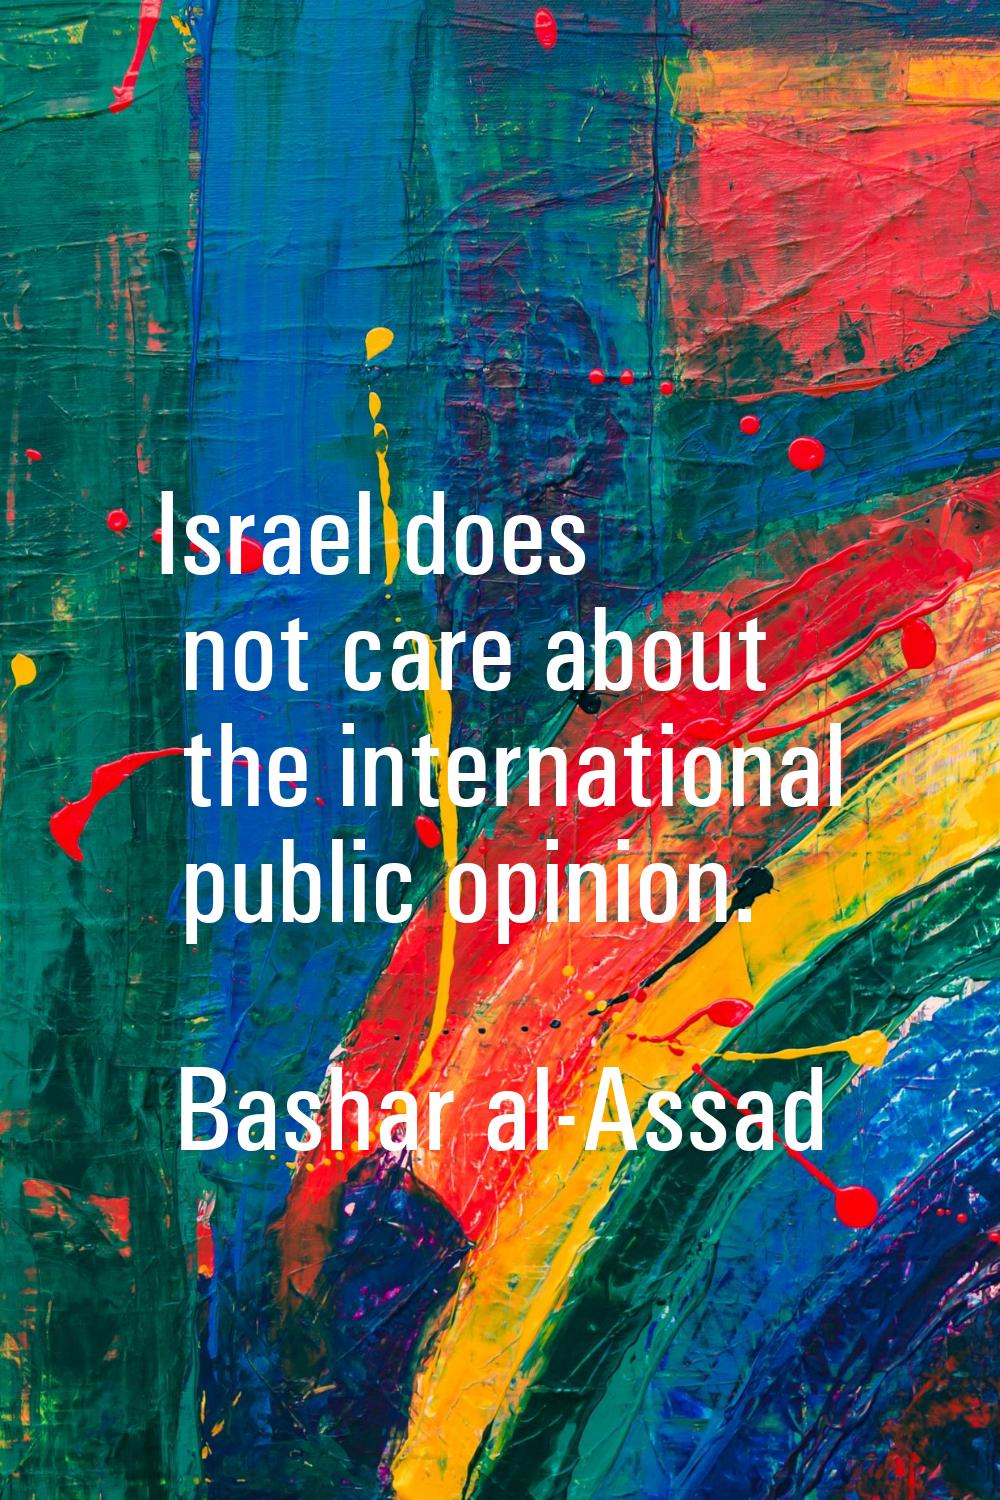 Israel does not care about the international public opinion.